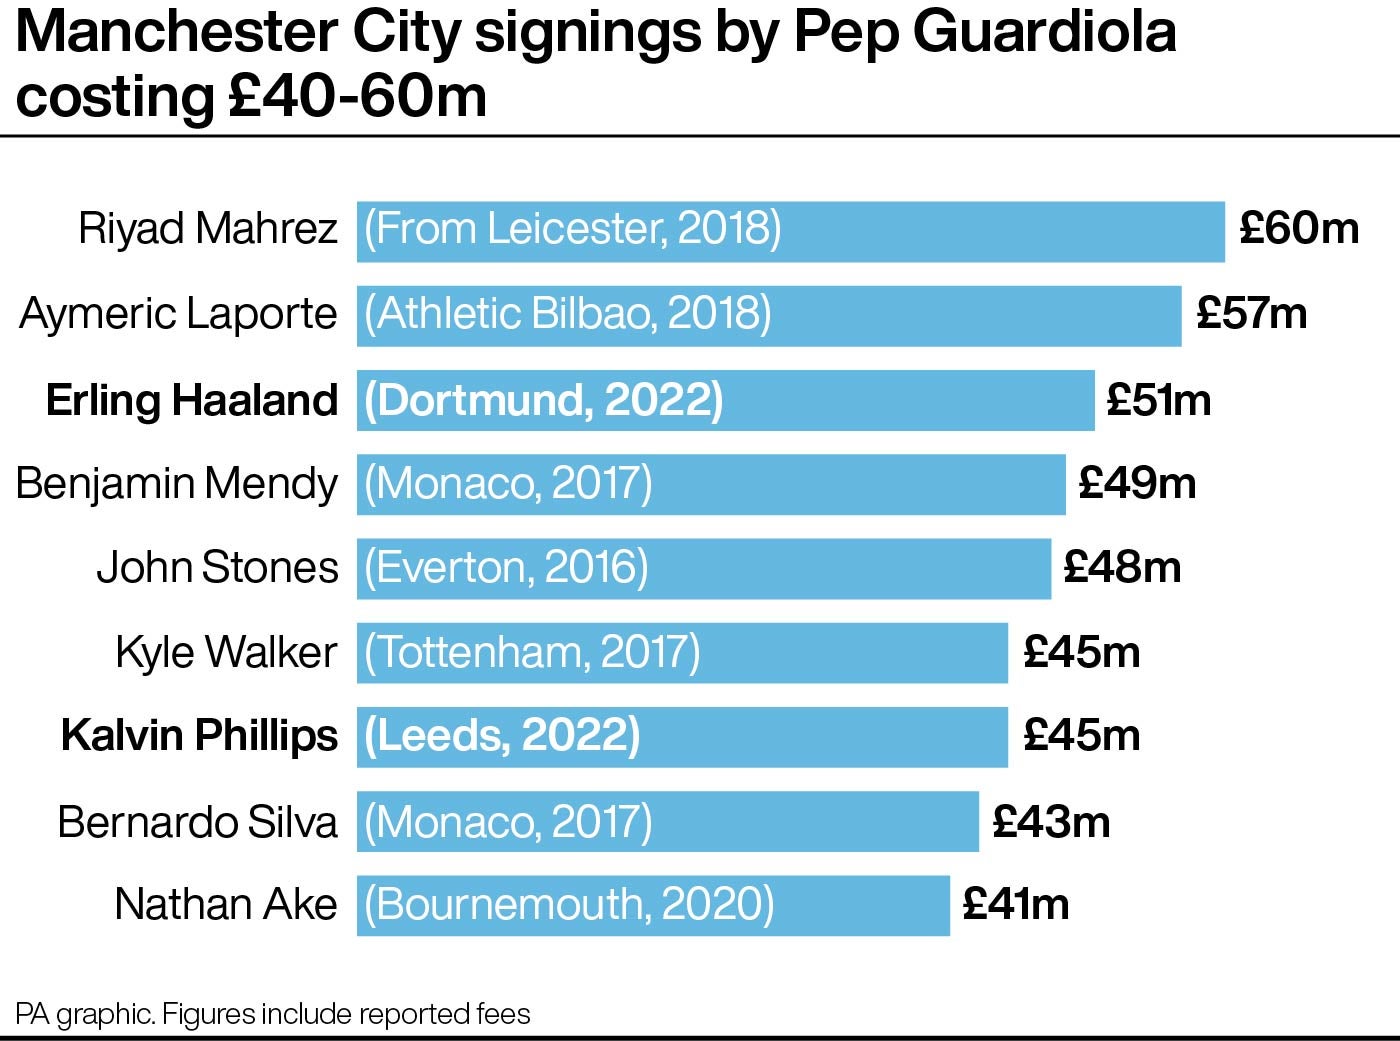 Kalvin Phillips and Erling Haaland add to Manchester City’s transfer fee trend (PA graphic)